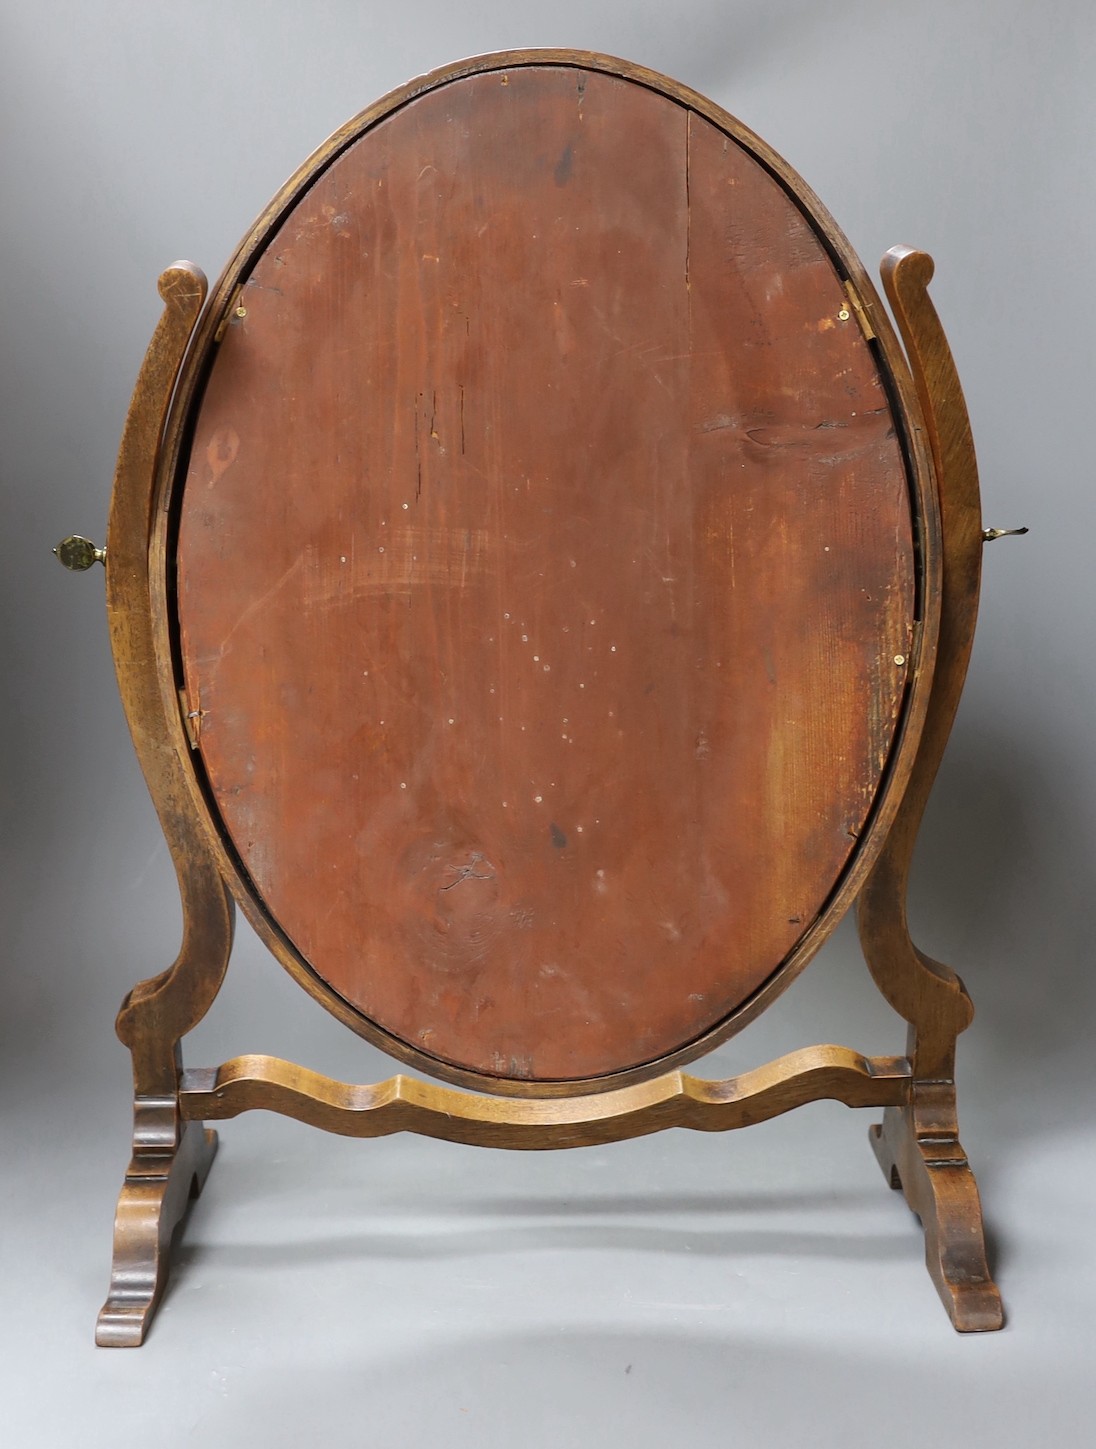 A swing mahogany frame toilet mirror with satinwood banding, 53cm tall